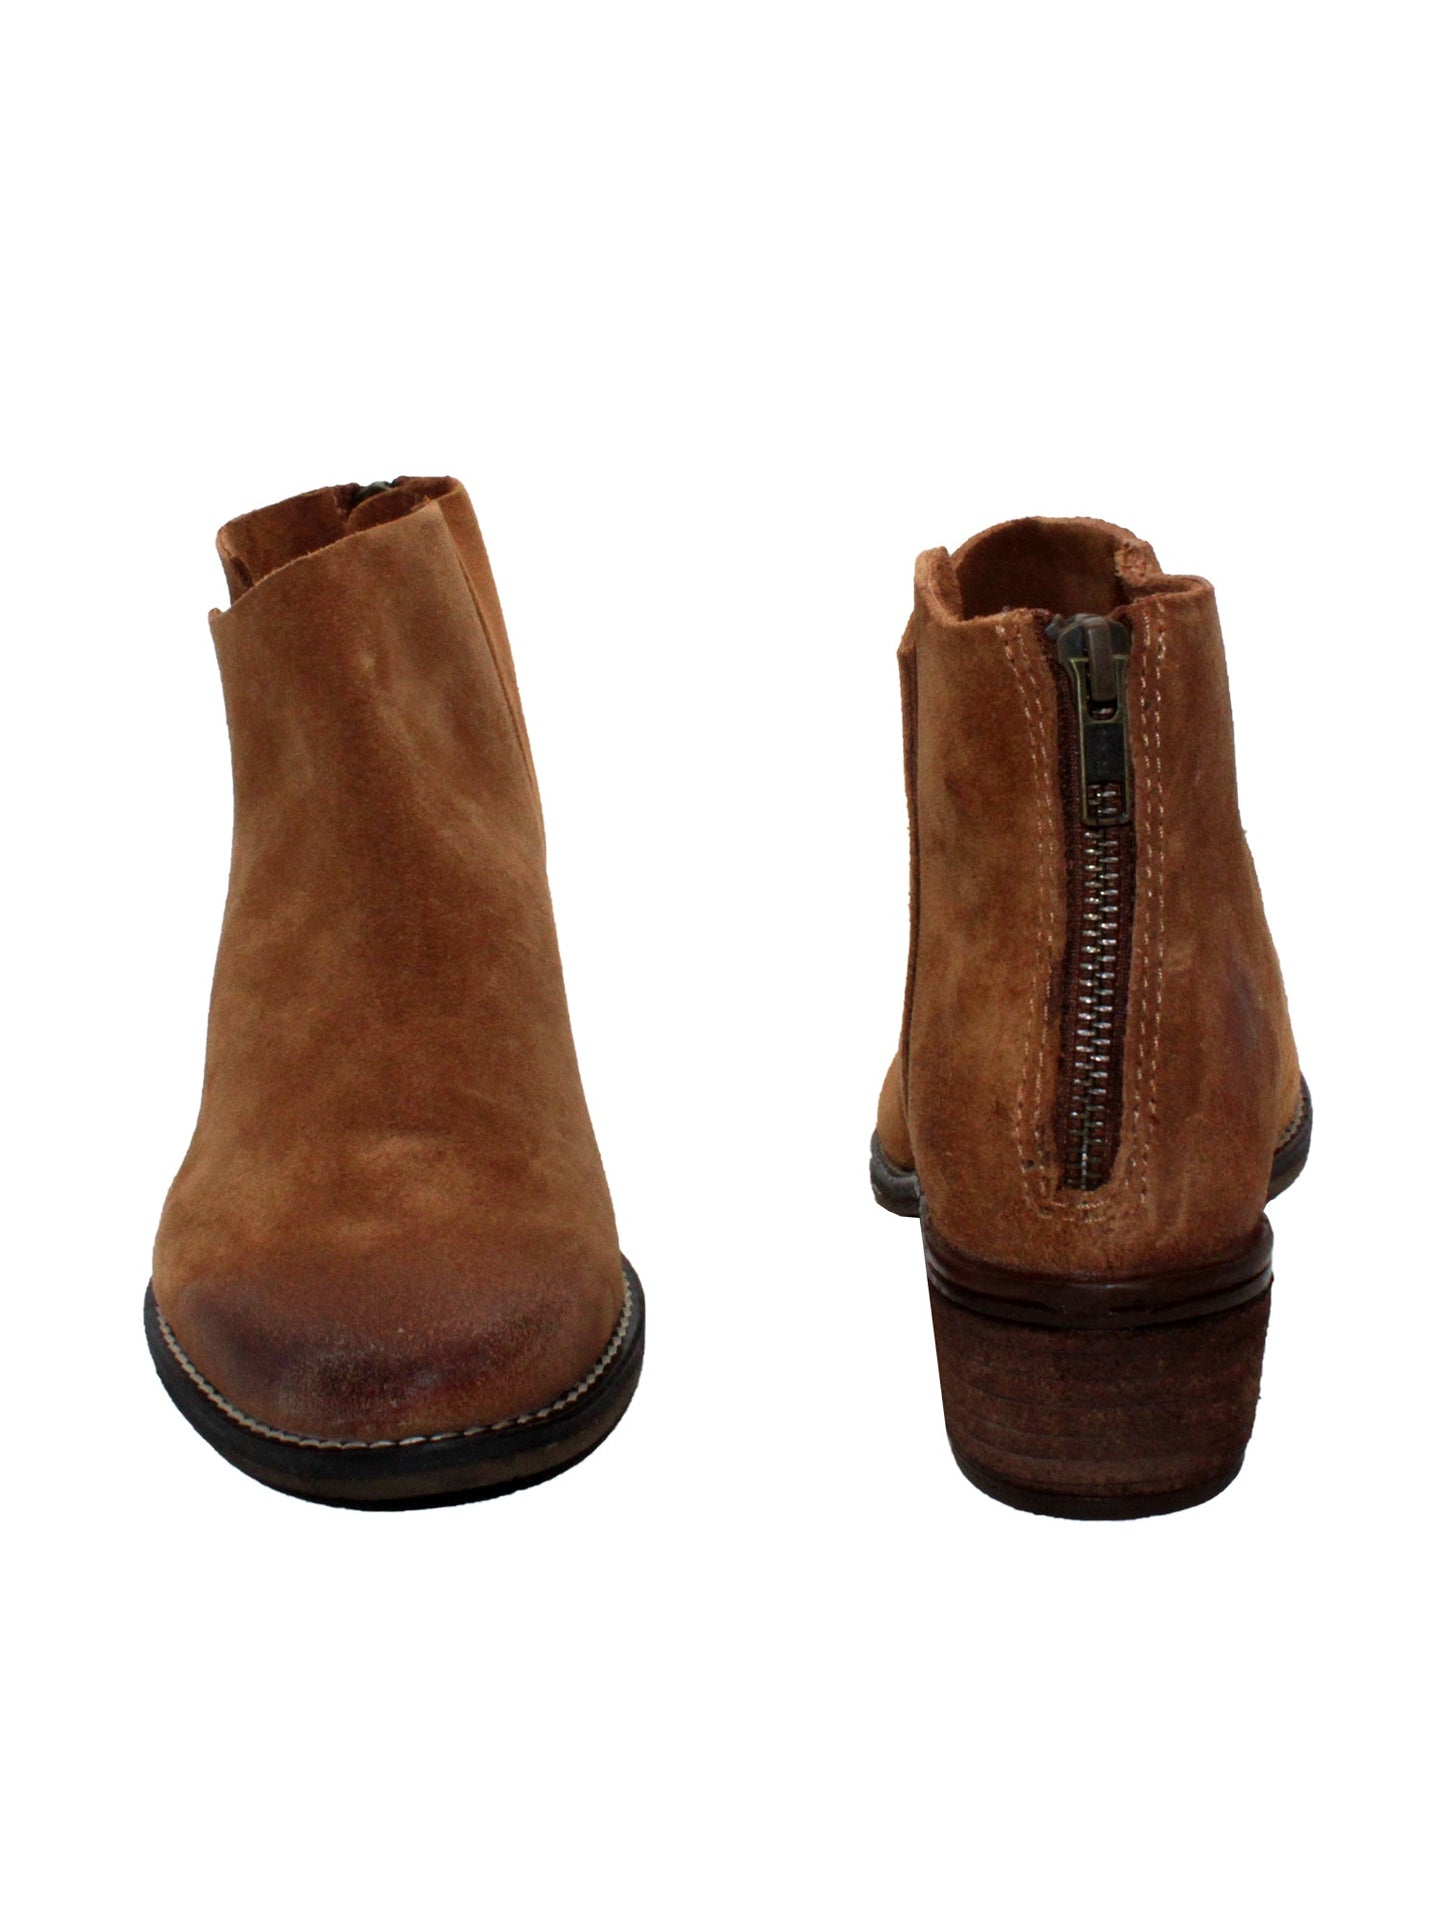 Very Volatile’s hand burnished suede ‘Aldworth’ bootie whiskey has an asymmetrical topline that adds effortless appeal to this wardrobe essential. Featuring padded insoles set atop sturdy rubber outsoles with stack leather heels and rustic stitched leather welting. front and back